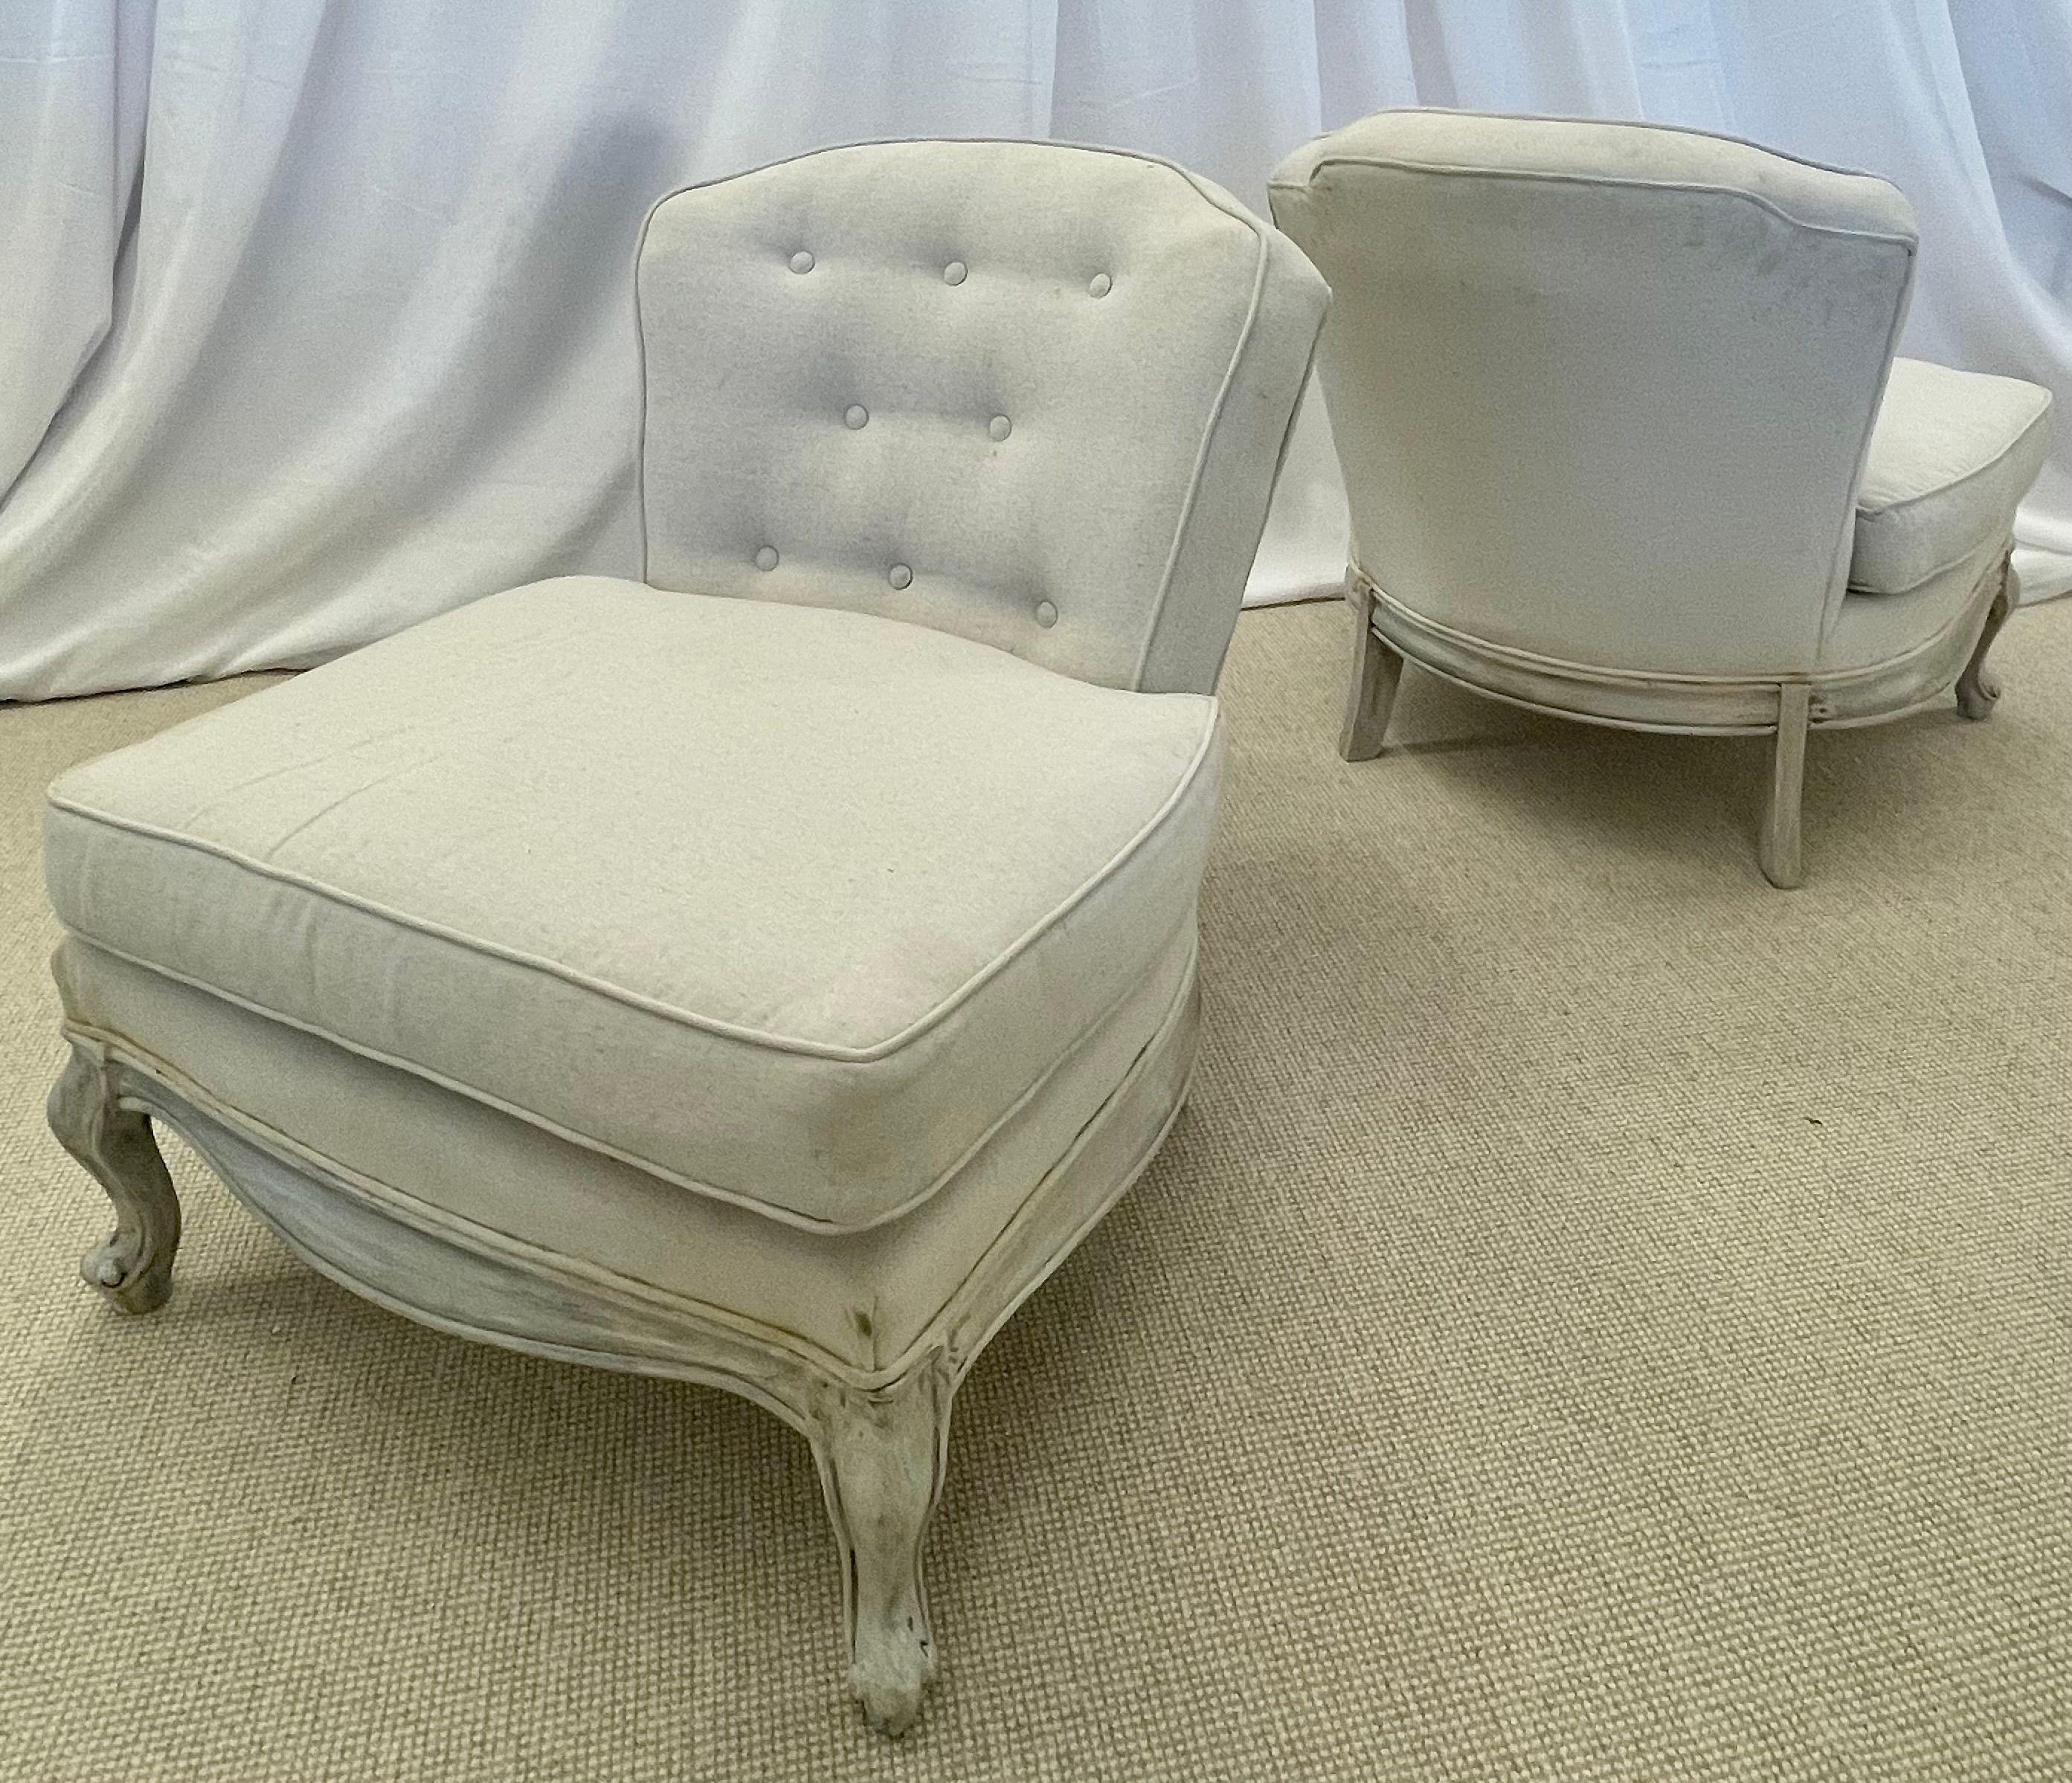 Pair of Gustavian slipper chairs, Swedish style distressed paint decorated, Linen.
Chic low profile slipper chairs having a hand painted distressed frame in the Gustavian / Swedish style. Off-white linen upholstery with tufted back.
Measures: seat